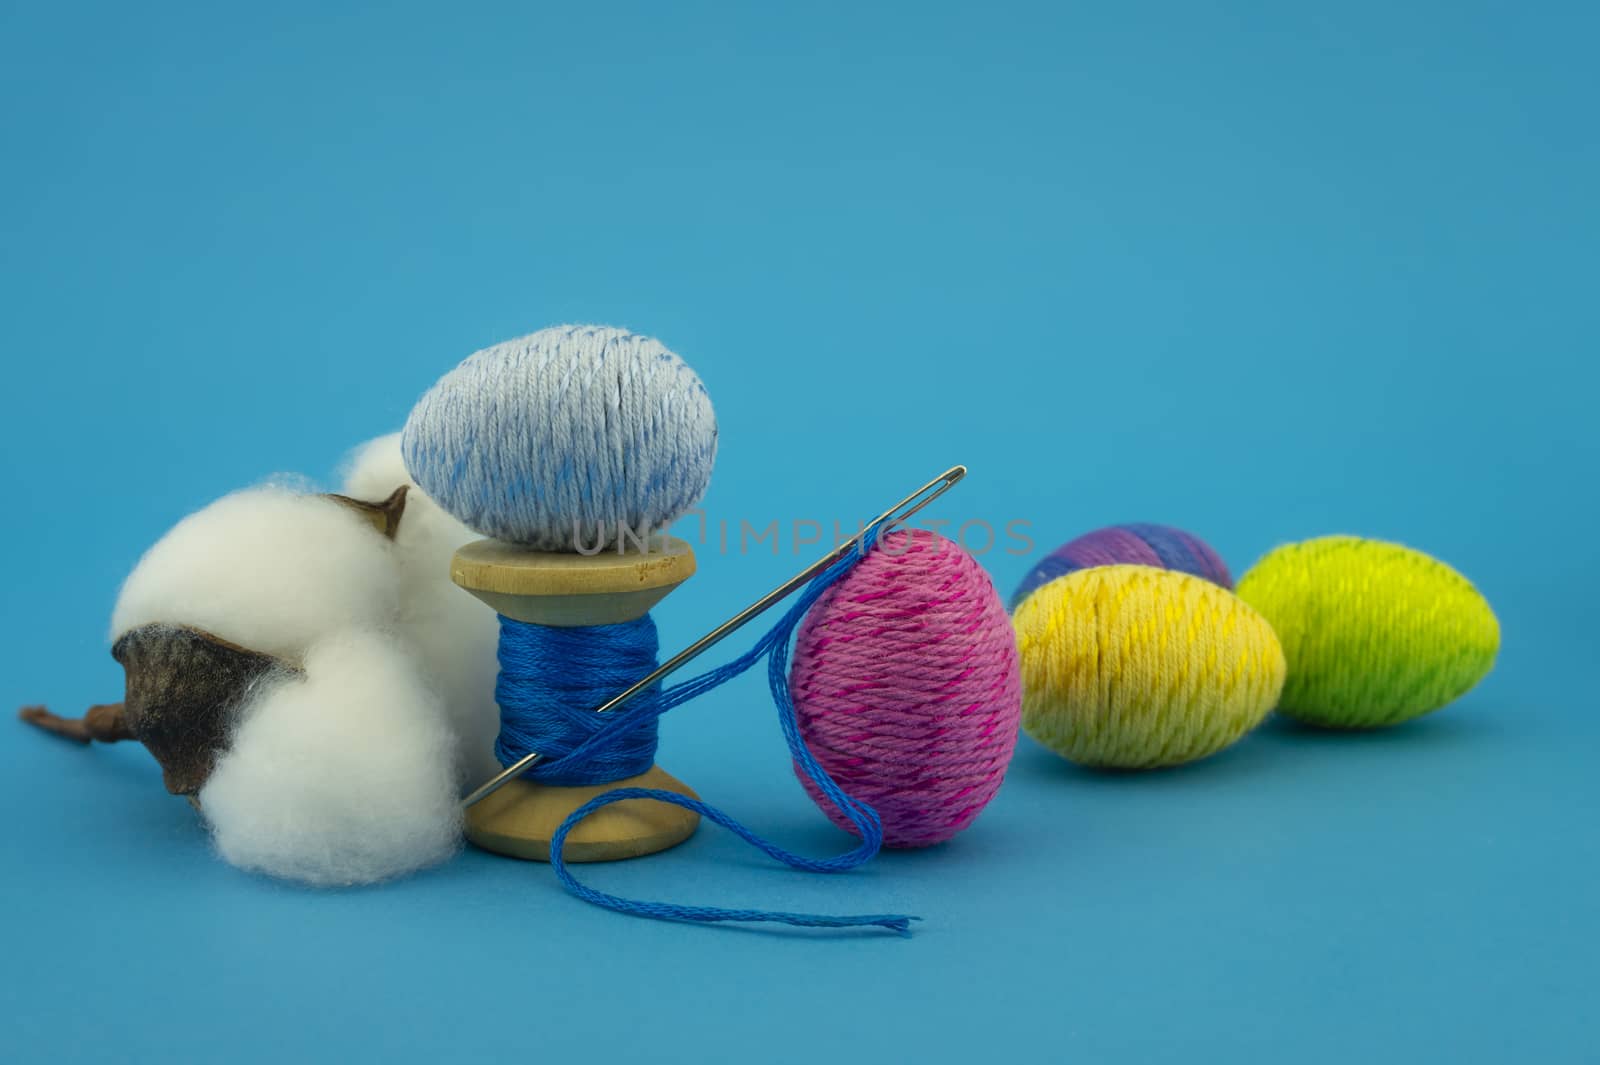 Handcrafted Easter decorations from natural cotton by NetPix